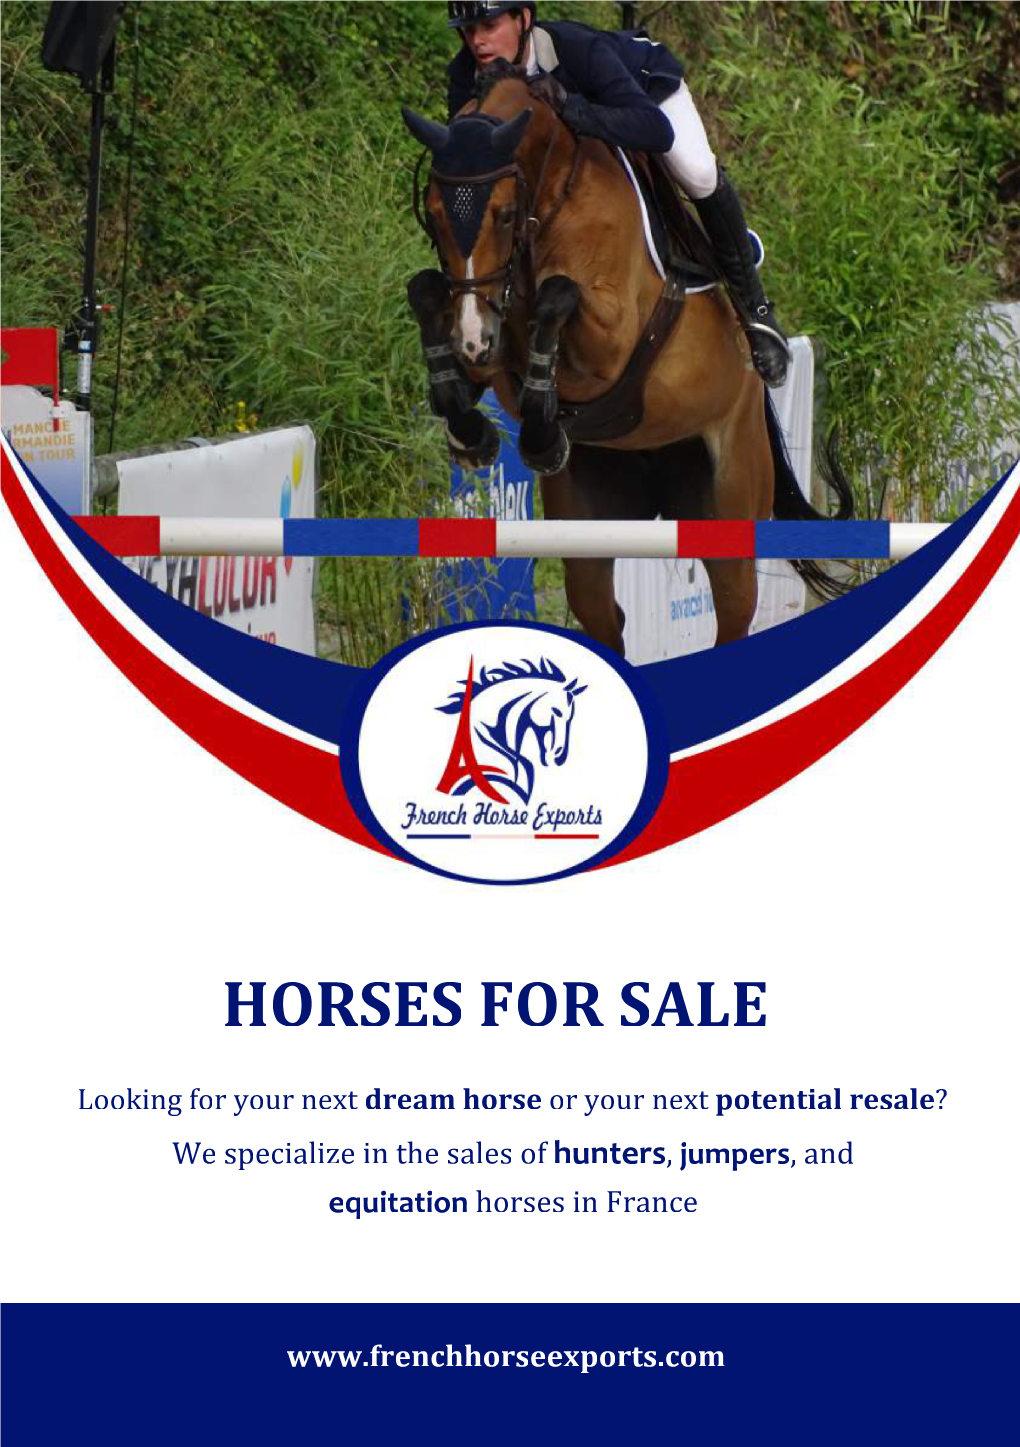 Download the Catalogue of Horses for Sale